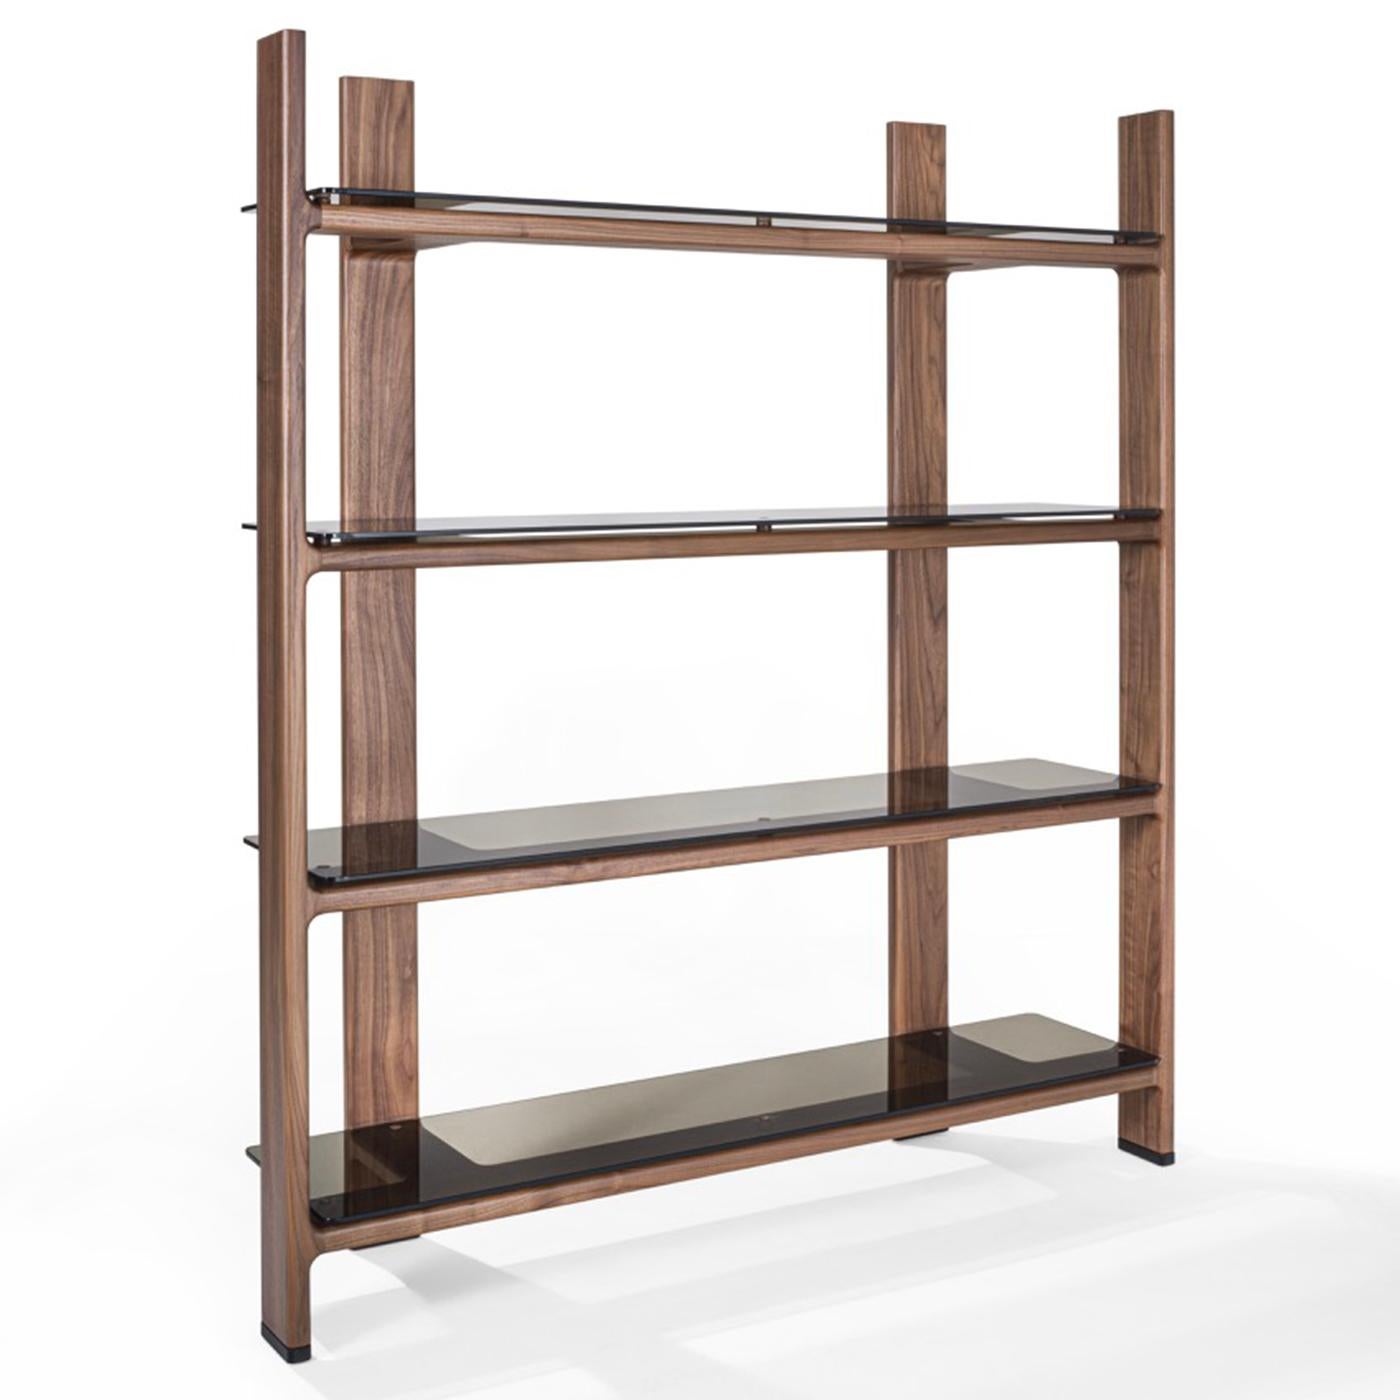 Luxury and simplicity effortlessly merge in this sleek bookcase of modern inspiration, traits making it a piece of outstanding versatility. The solid wooden structure boasts an airy design where natural grain is its only spontaneous and unrepeatable